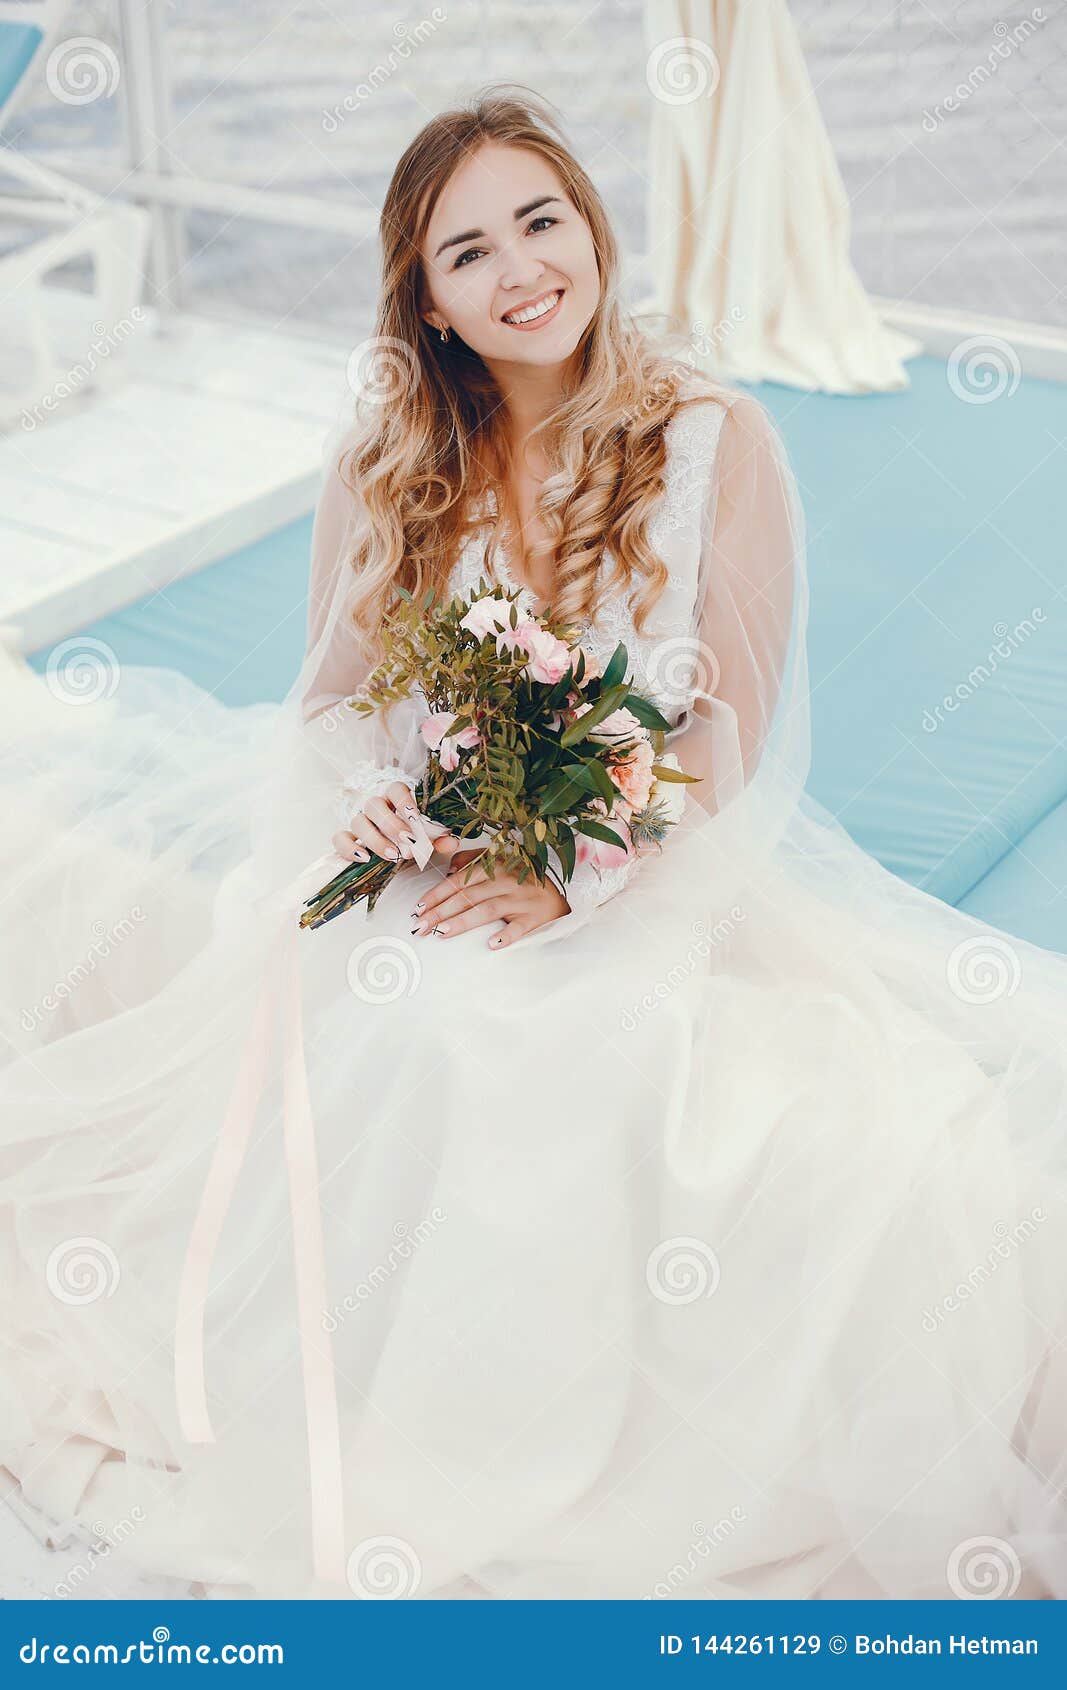 Beautiful Bride in a Long White Wedding Dress Stock Image - Image of ...